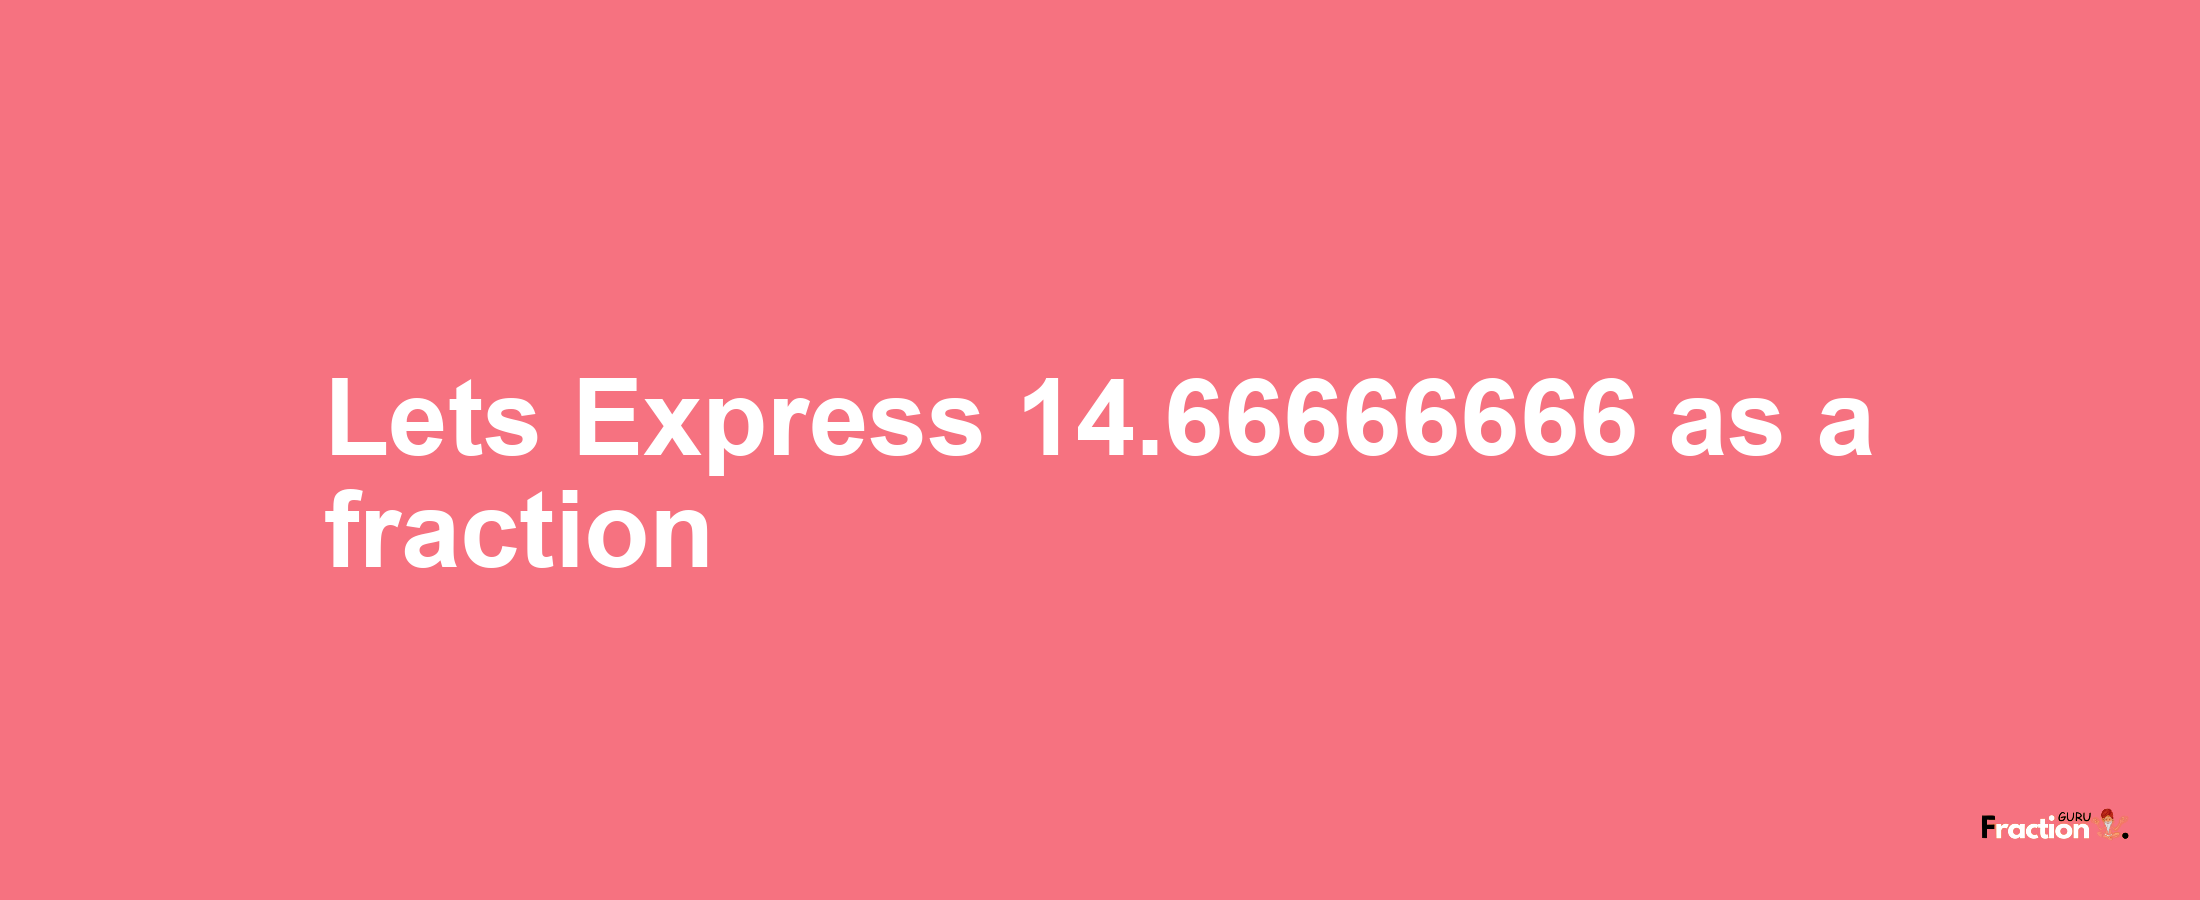 Lets Express 14.66666666 as afraction